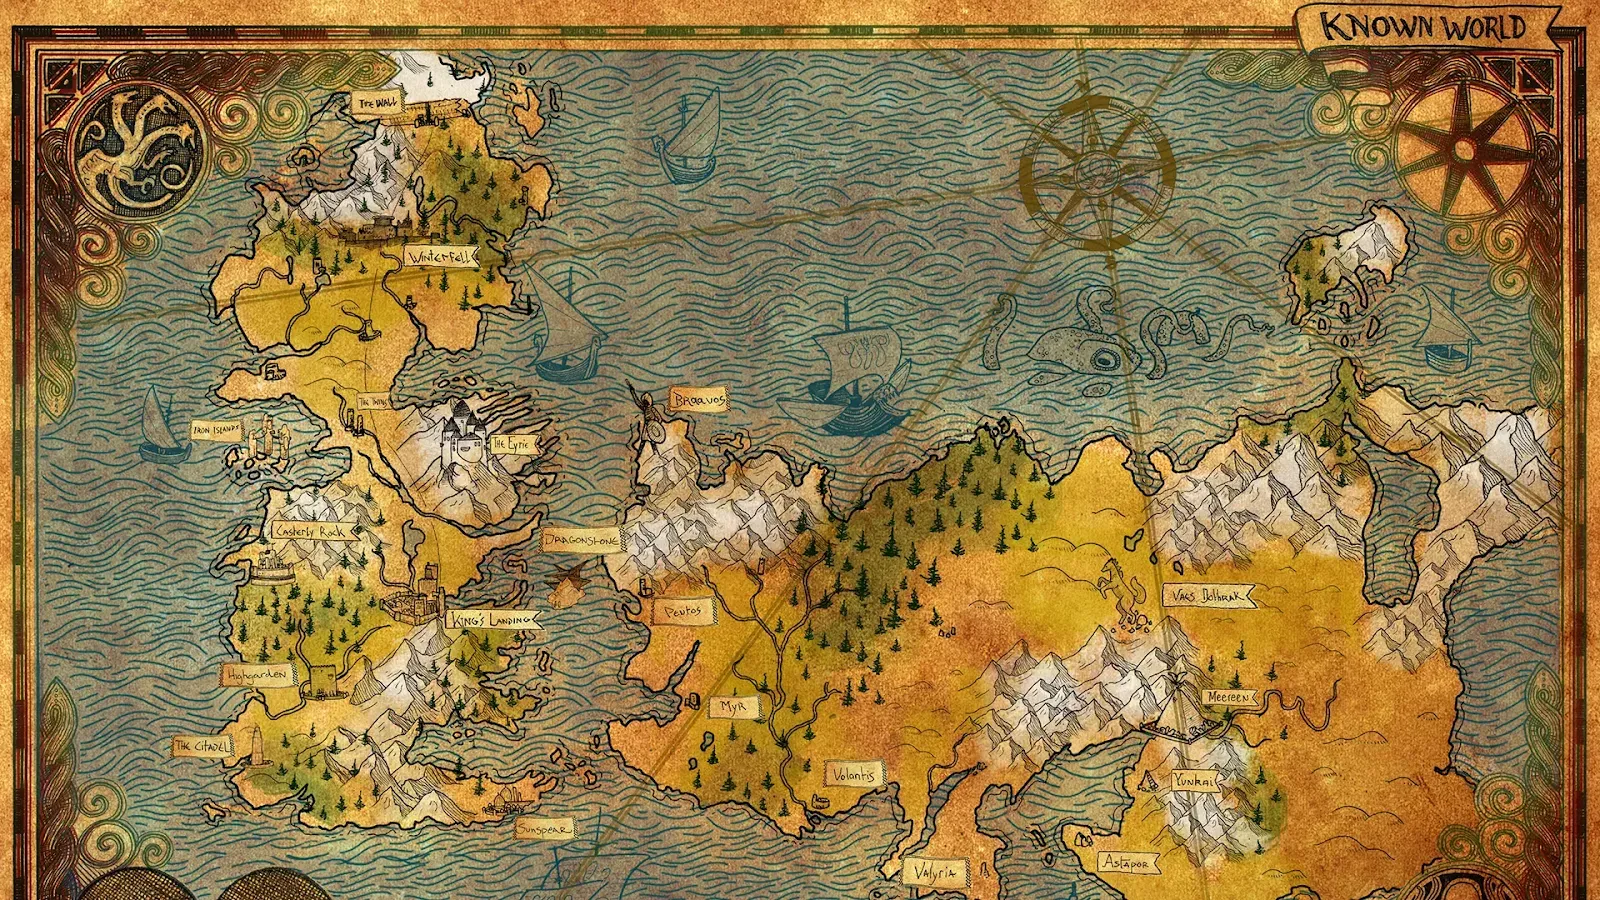 A map showcasing unexplored territories and distant lands beyond the familiar kingdoms of Westeros